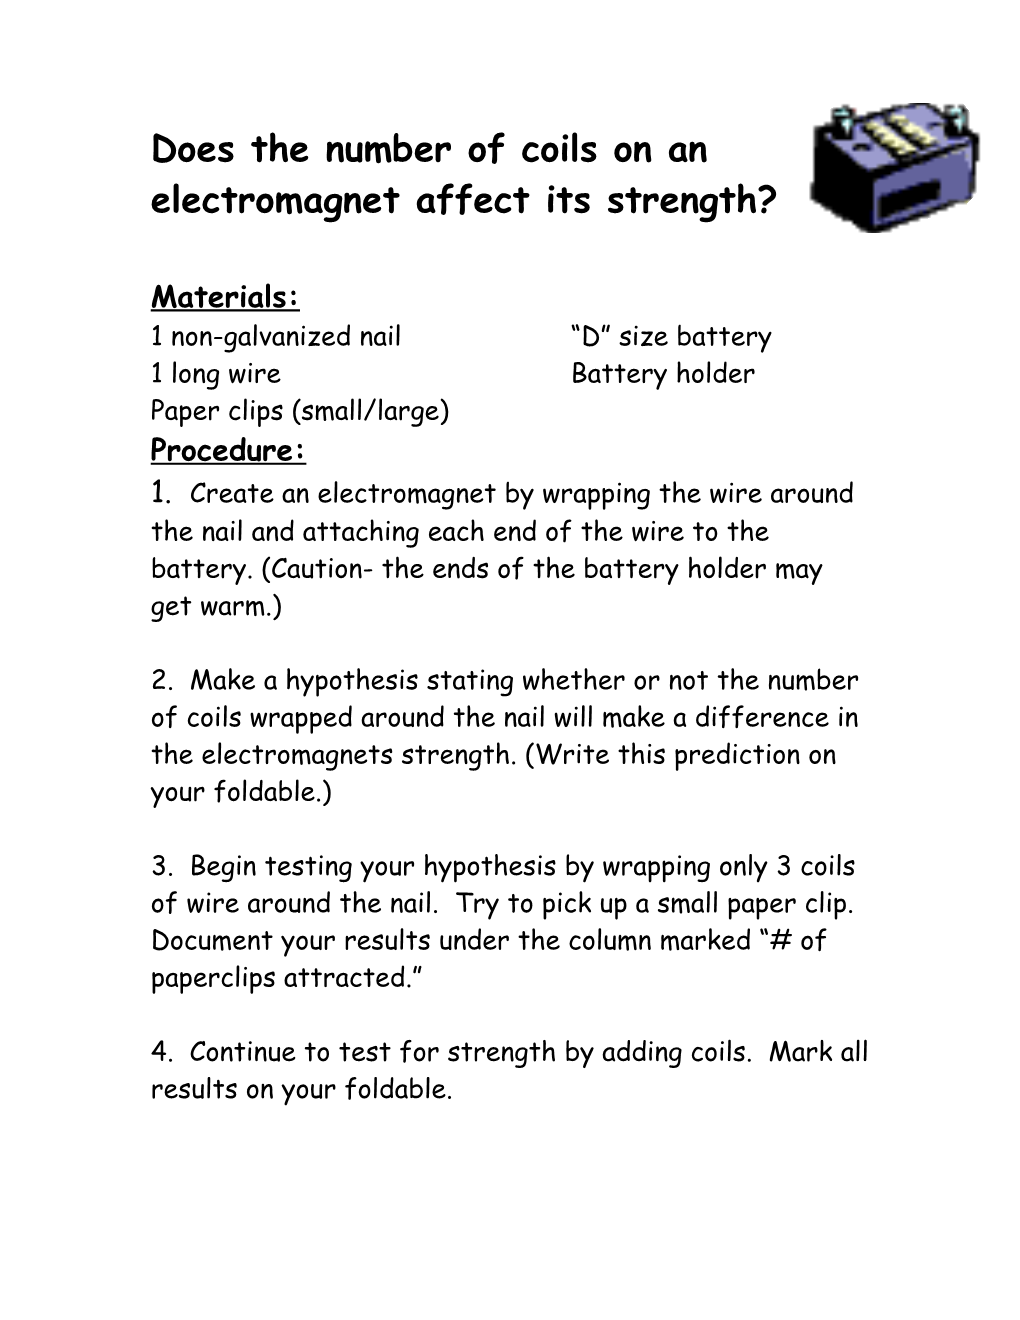 Does the Number of Coils on an Electromagnet Affect Its Strength